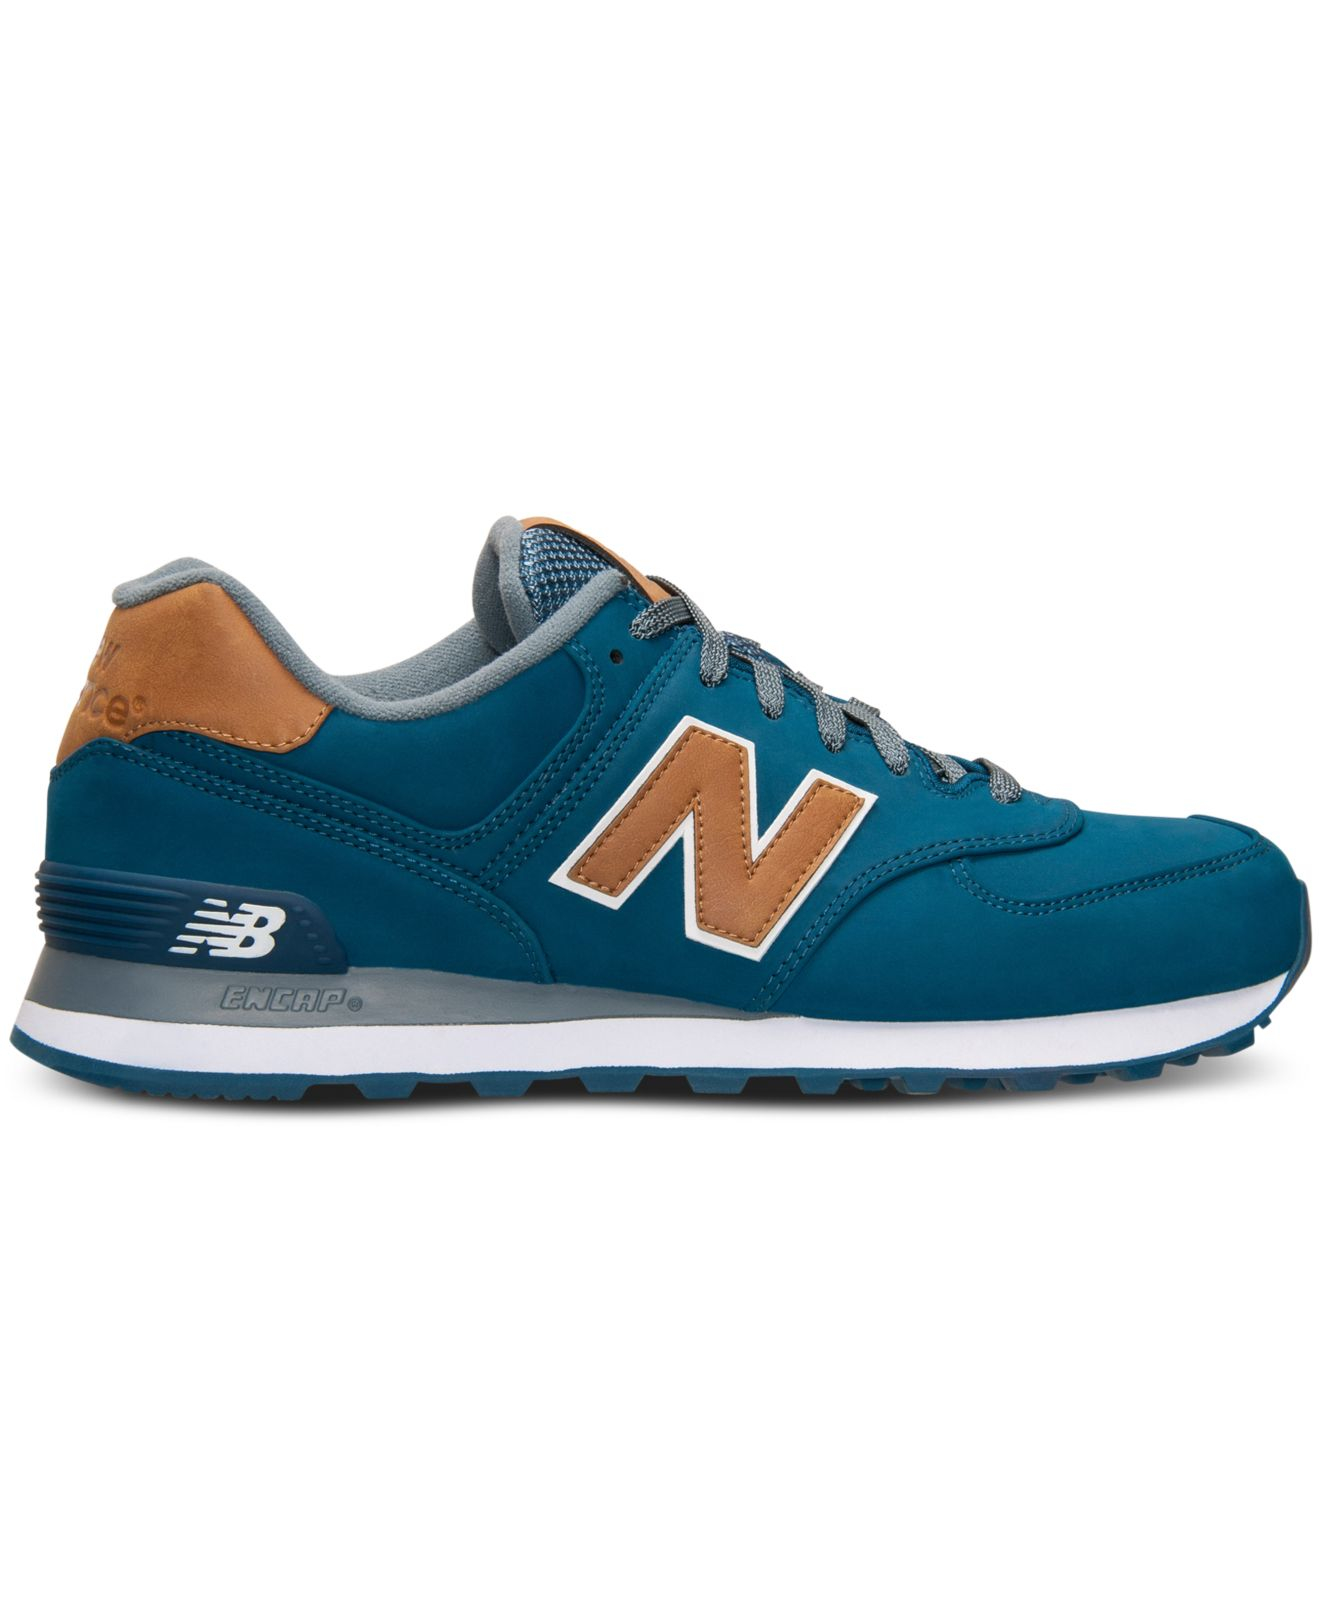 Lyst - New Balance Men's 574 Lux Casual Sneakers From Finish Line in ...